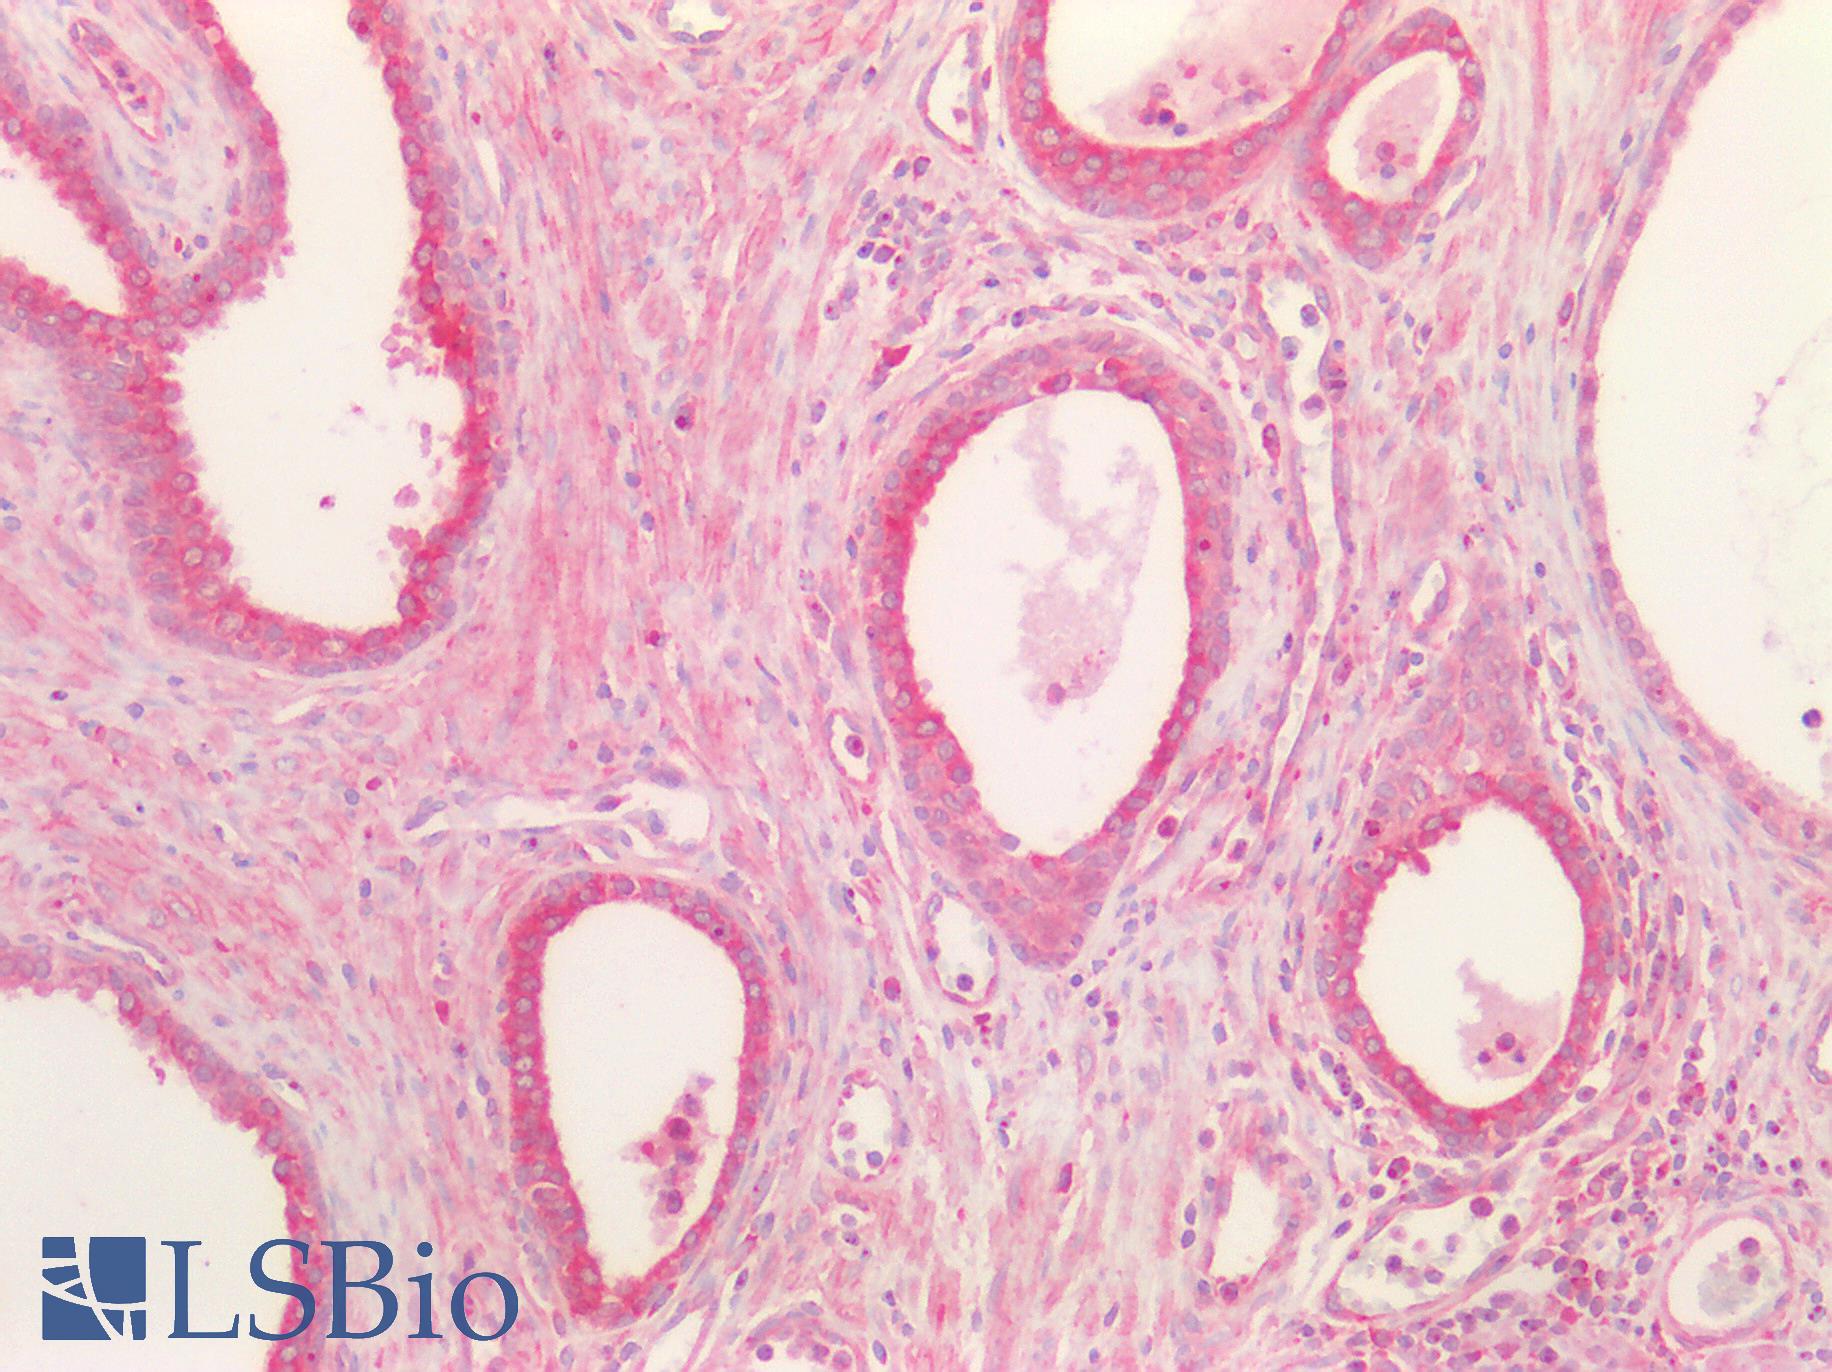 CD95 / FAS Antibody - Human Prostate: Formalin-Fixed, Paraffin-Embedded (FFPE)